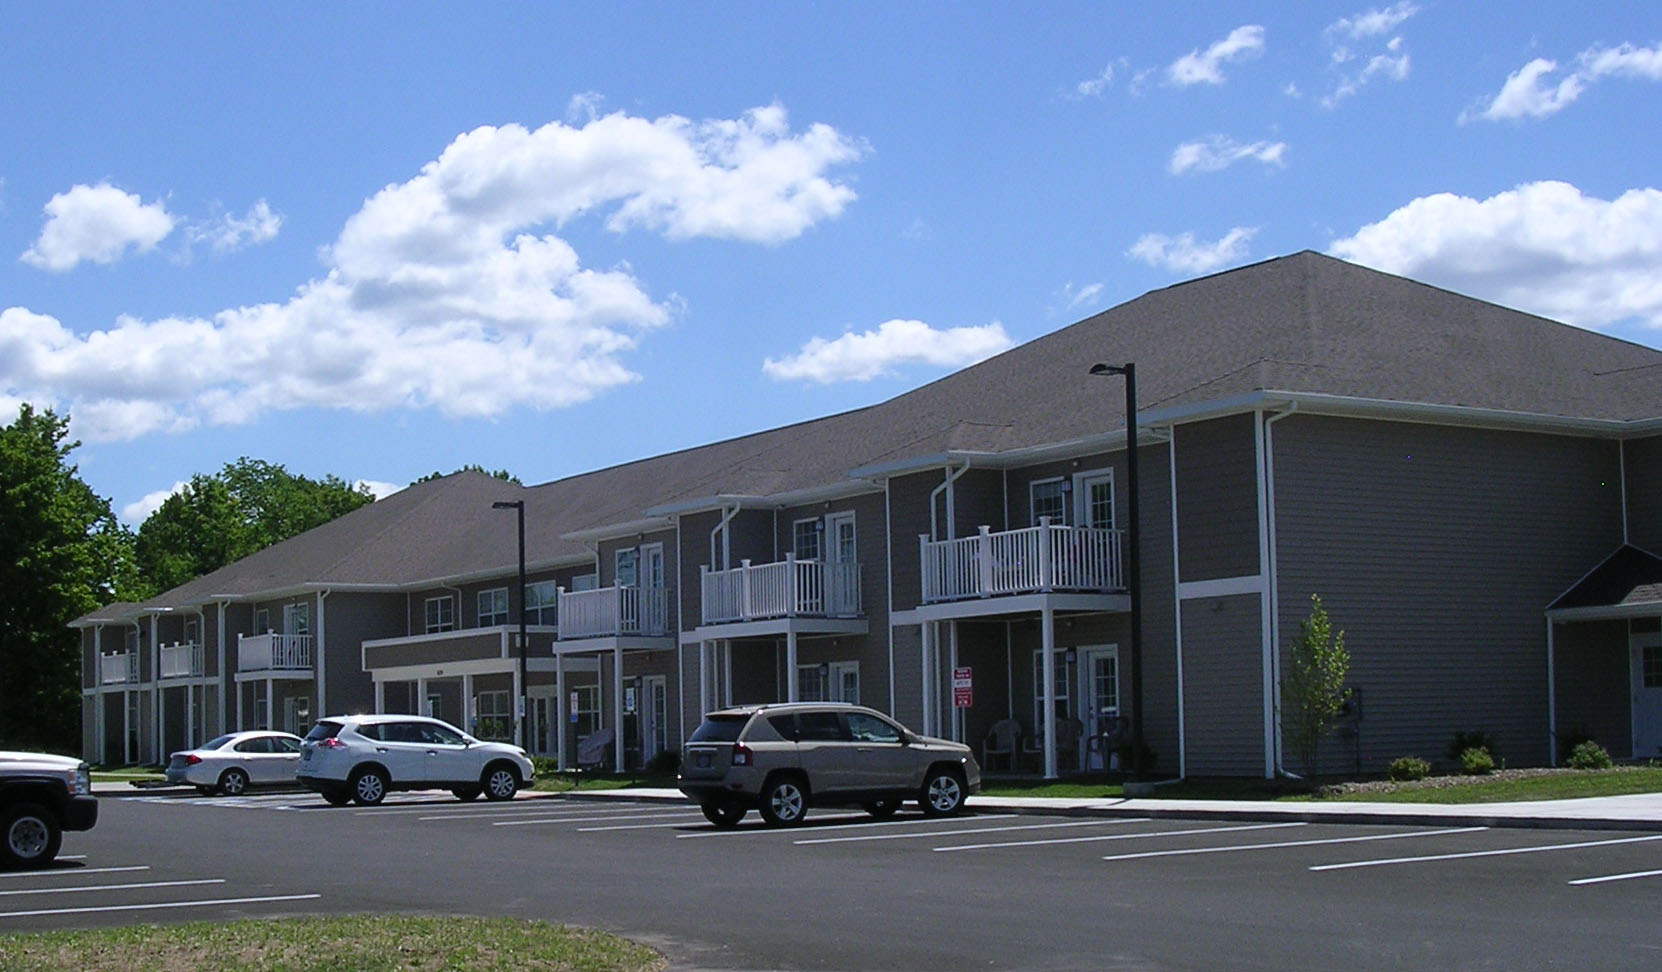 property management company client list syracuse ny street view image of island hollow senior apartments